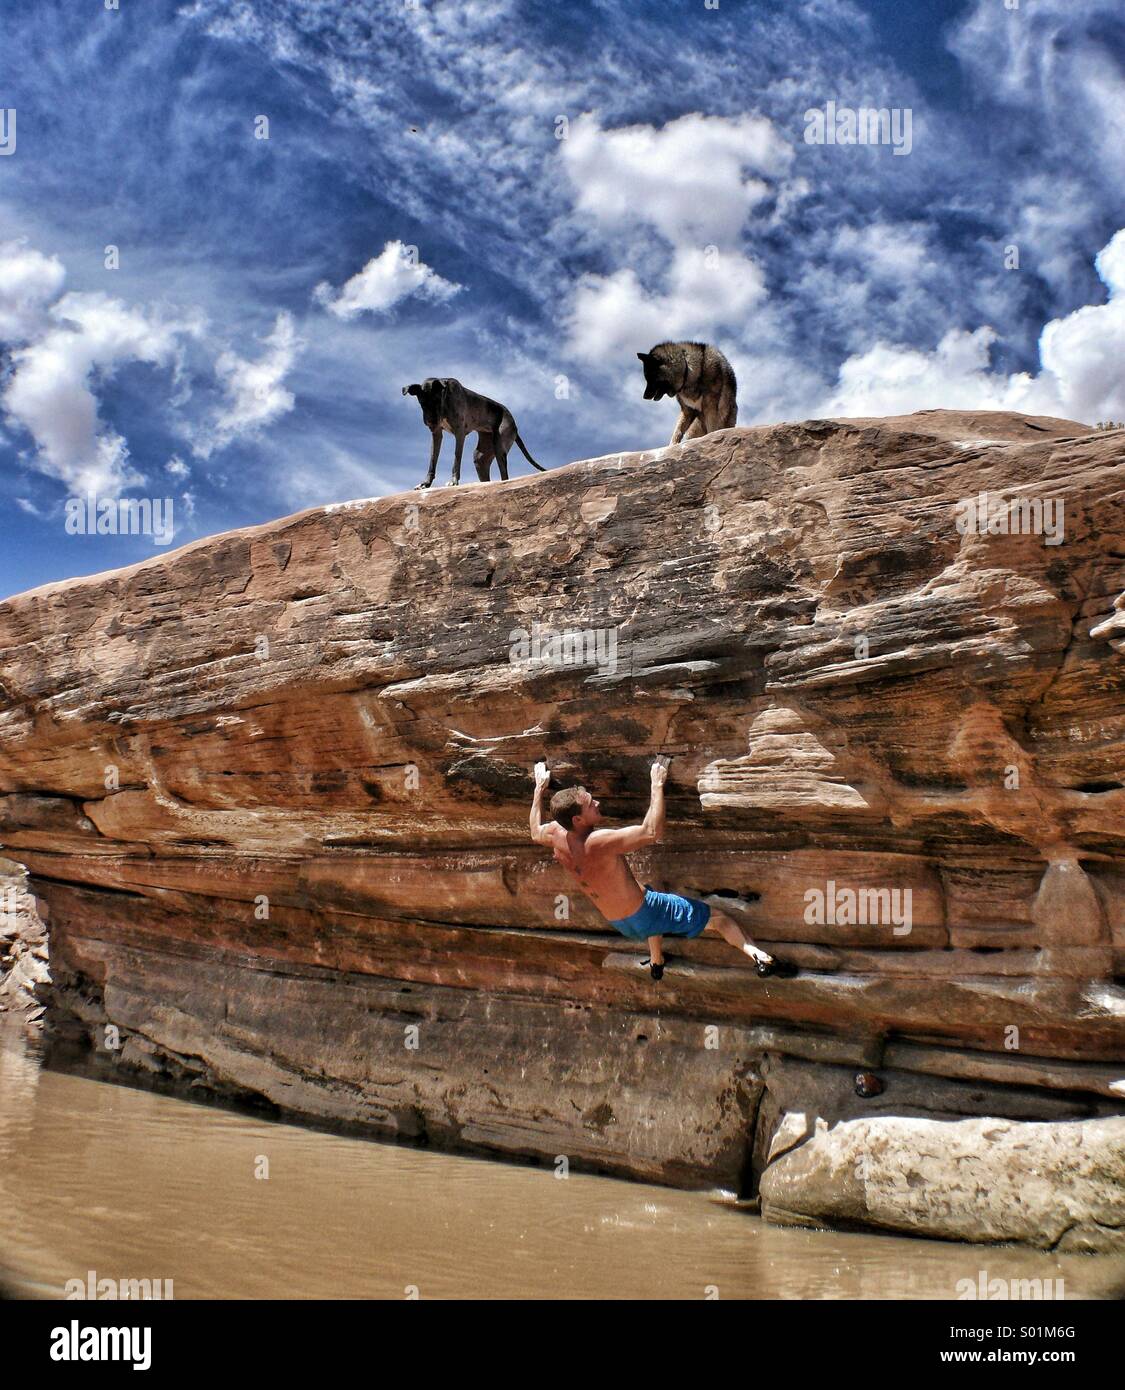 Two dogs watch a fit man rock climber boulder over the Colorado river in Moab, Utah. Stock Photo